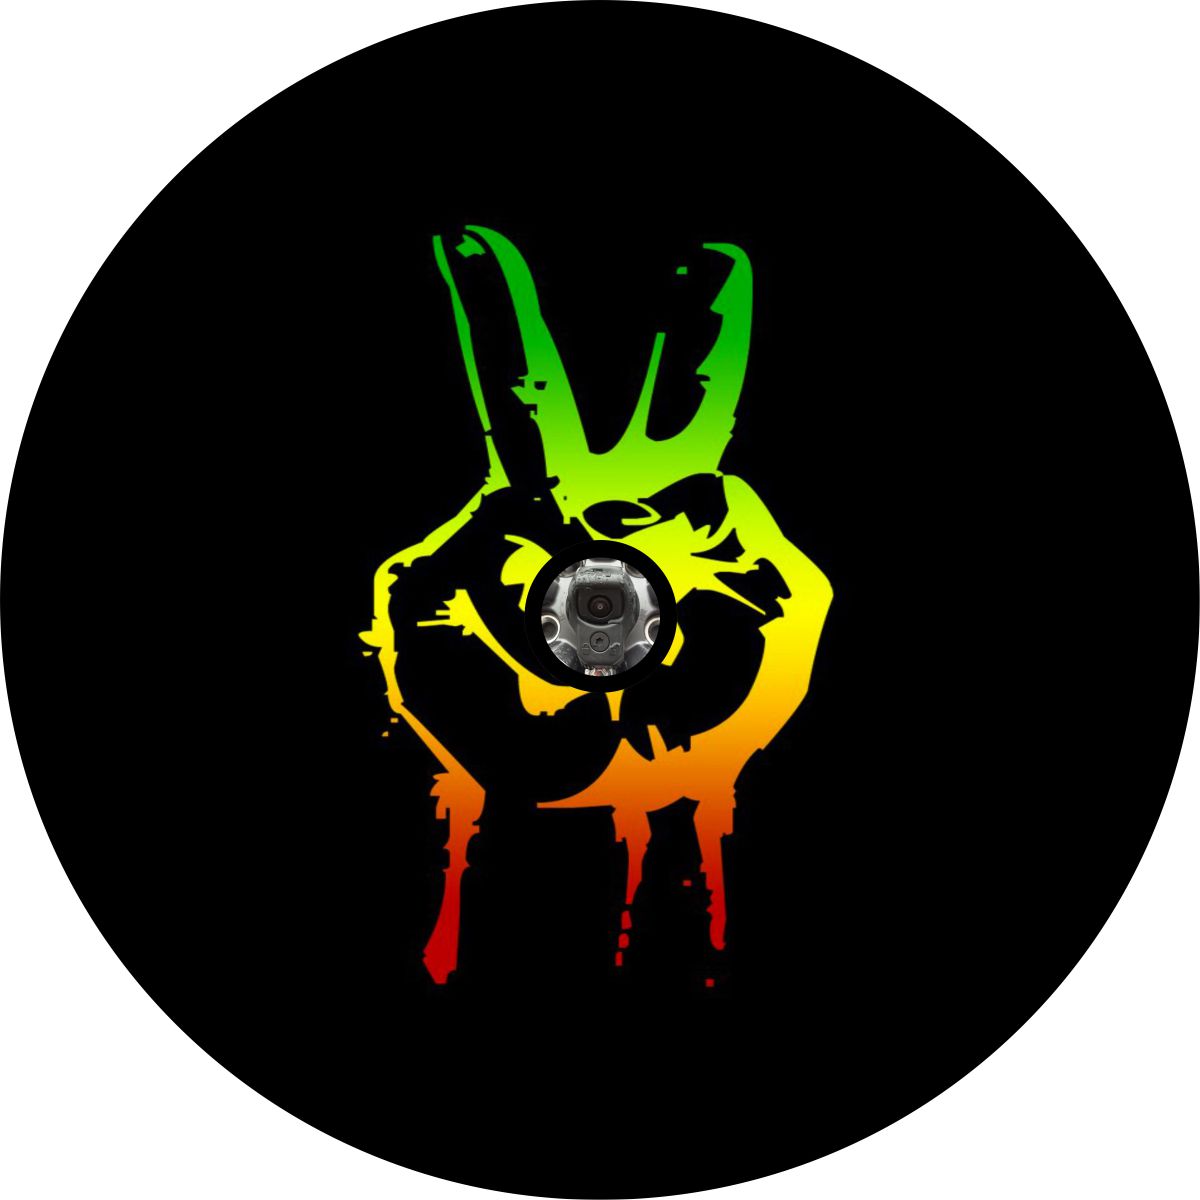  green, yellow, orange, red ombre rastafarian colored peace sign hand spare tire cover design example on black vinyl with a camera hole for spare wheels that have a center backup camera.